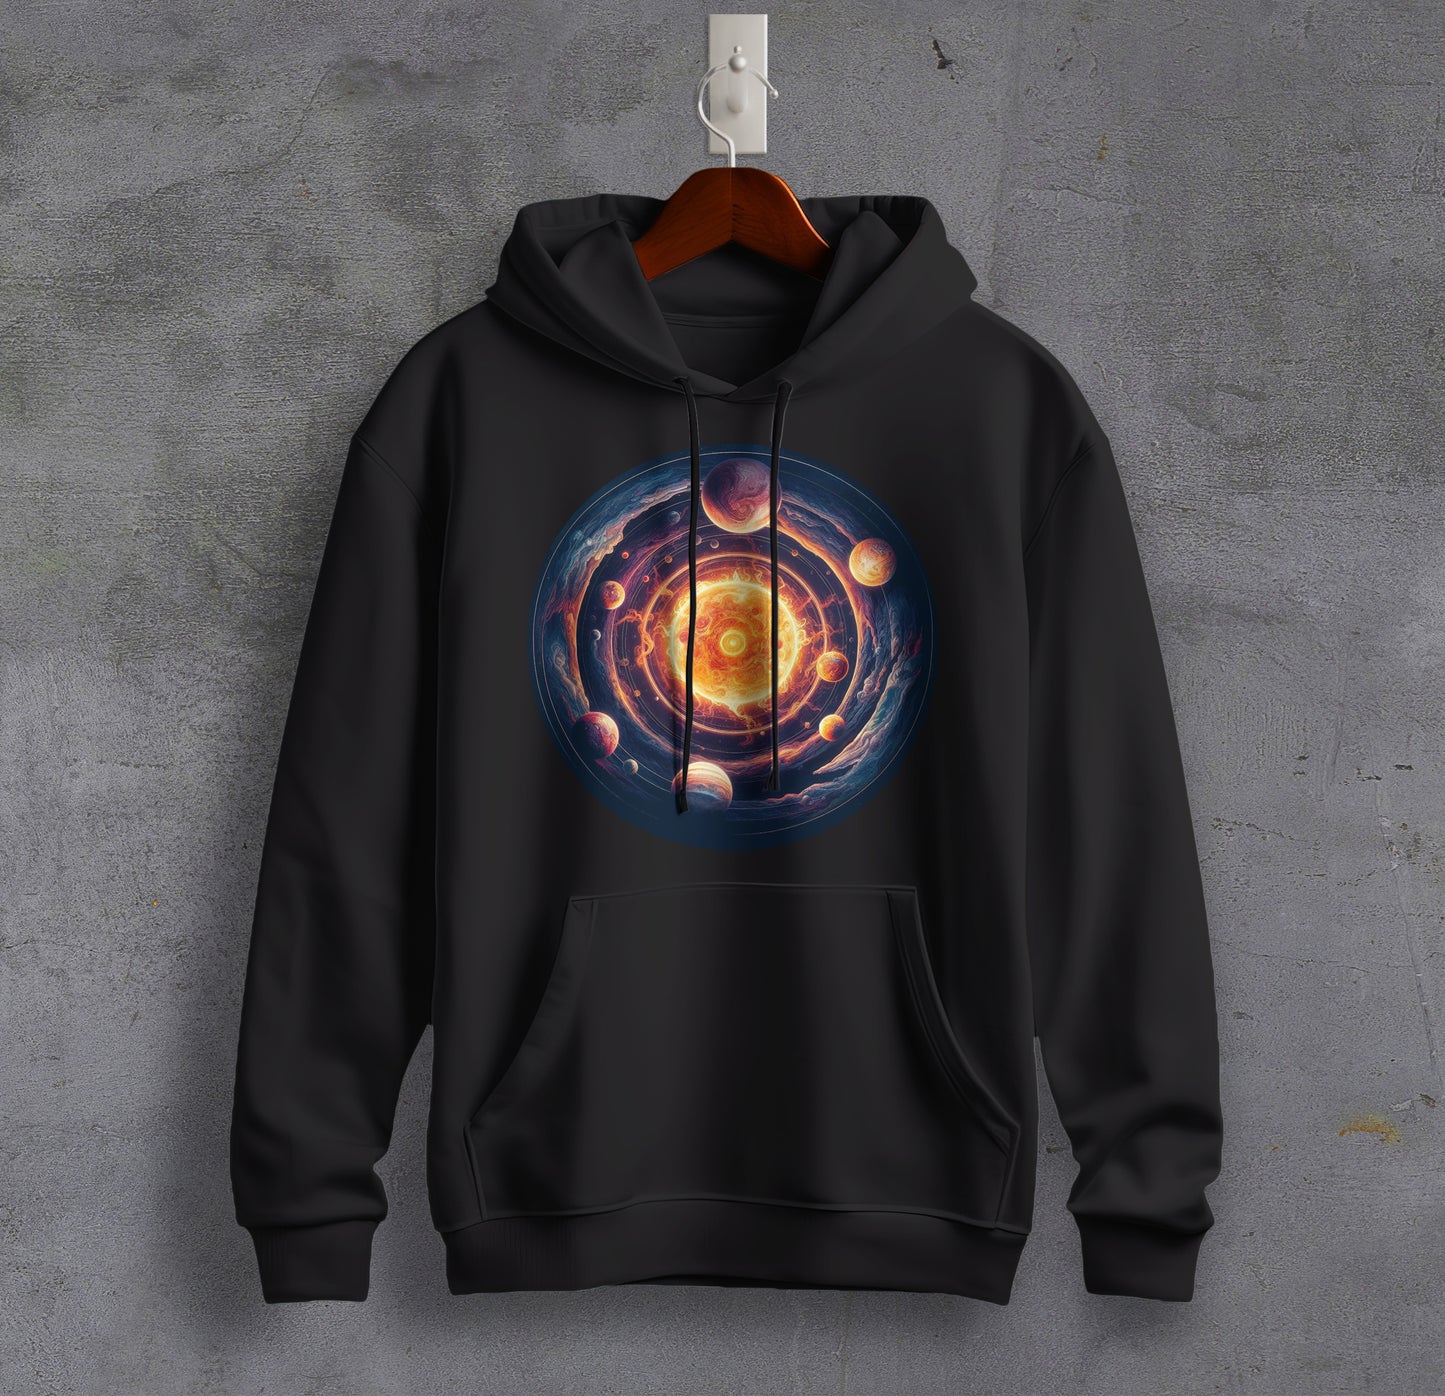 Cosmic Odyssey - Graphic Printed Hooded Sweat Shirt for Men - Cotton - Cosmos Sweat Shirt 🪐 ☀️ ☯️ 🌘🌑🌒